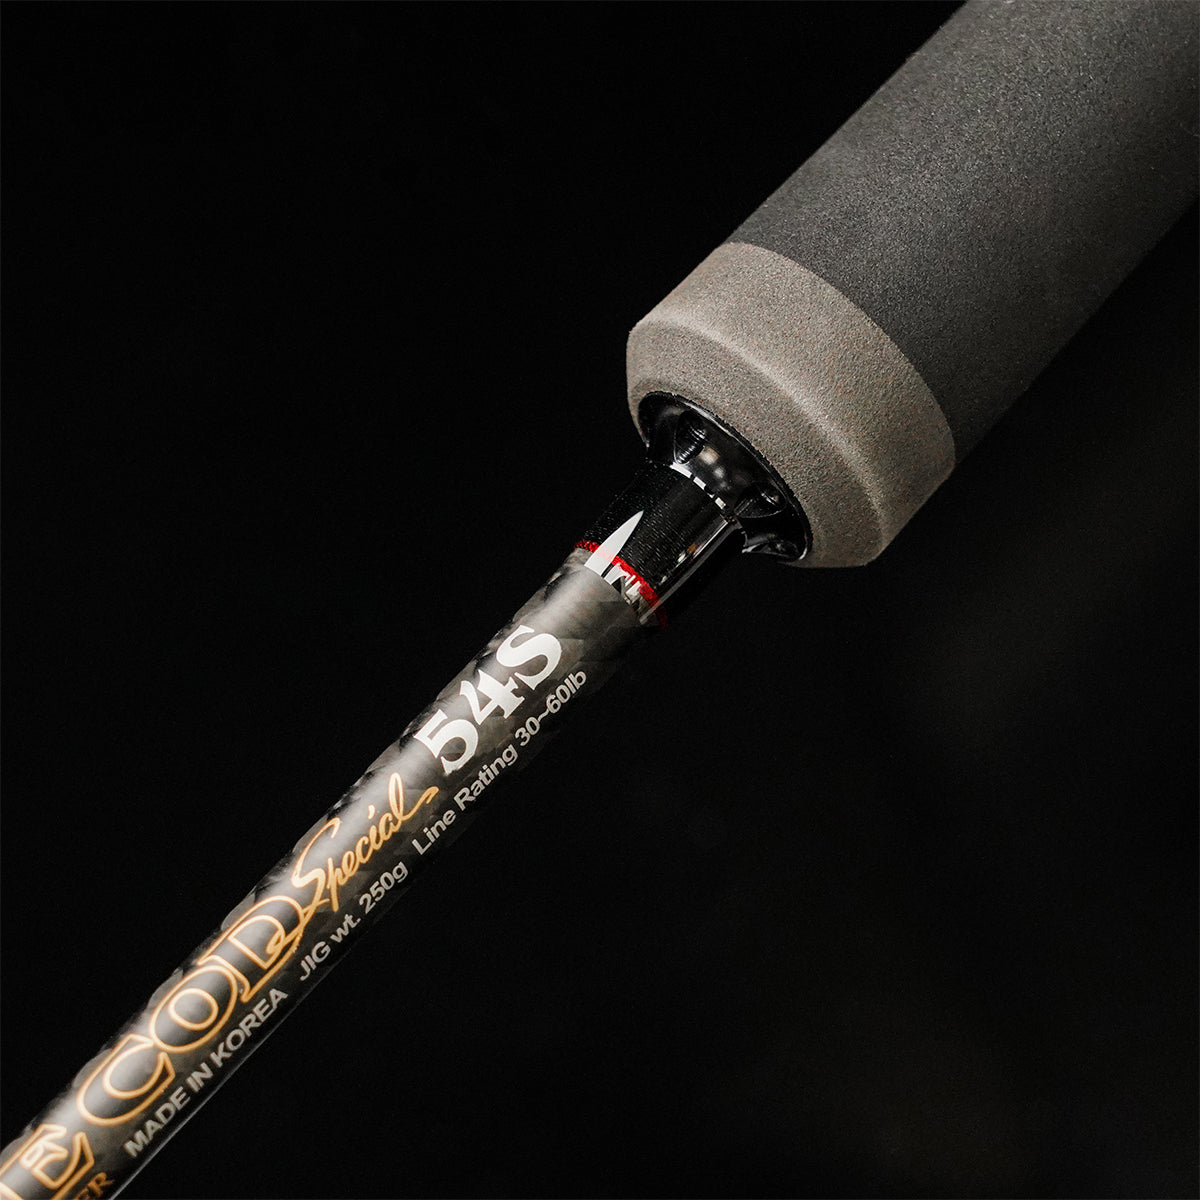 Cape Cod Special 250g 54S Spinning Rod